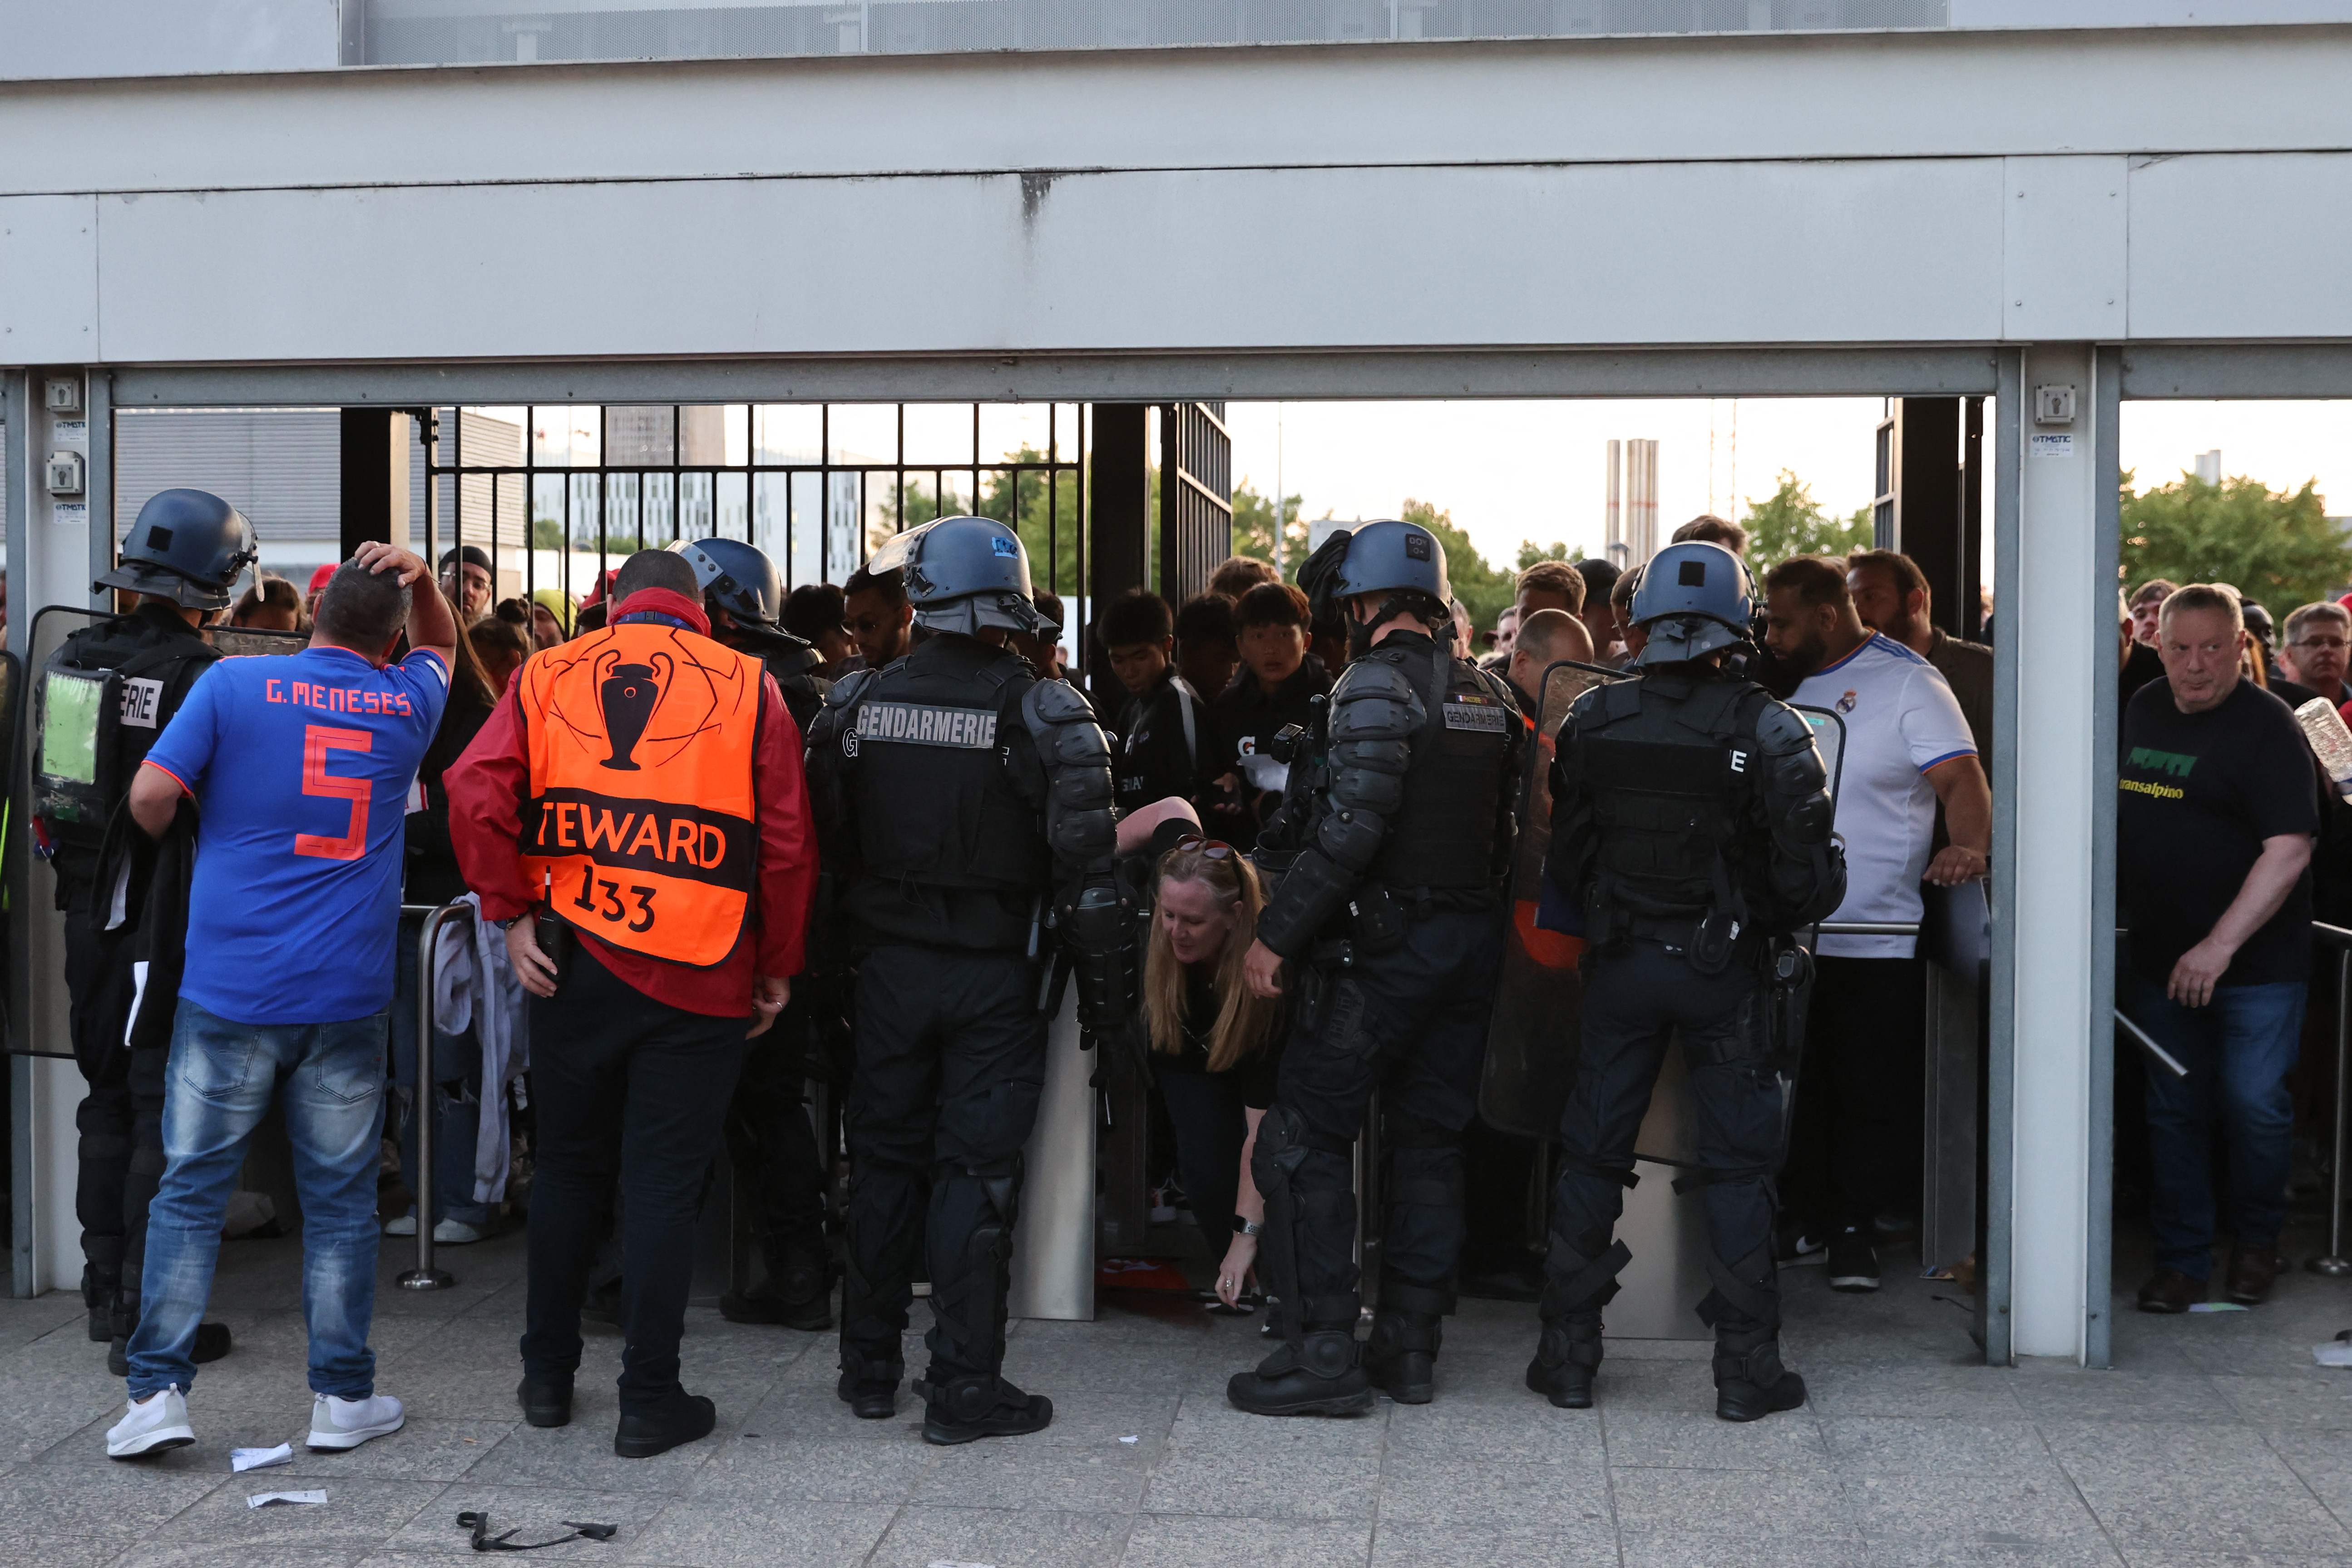 Real Madrid fans attempt to enter the Stade de France